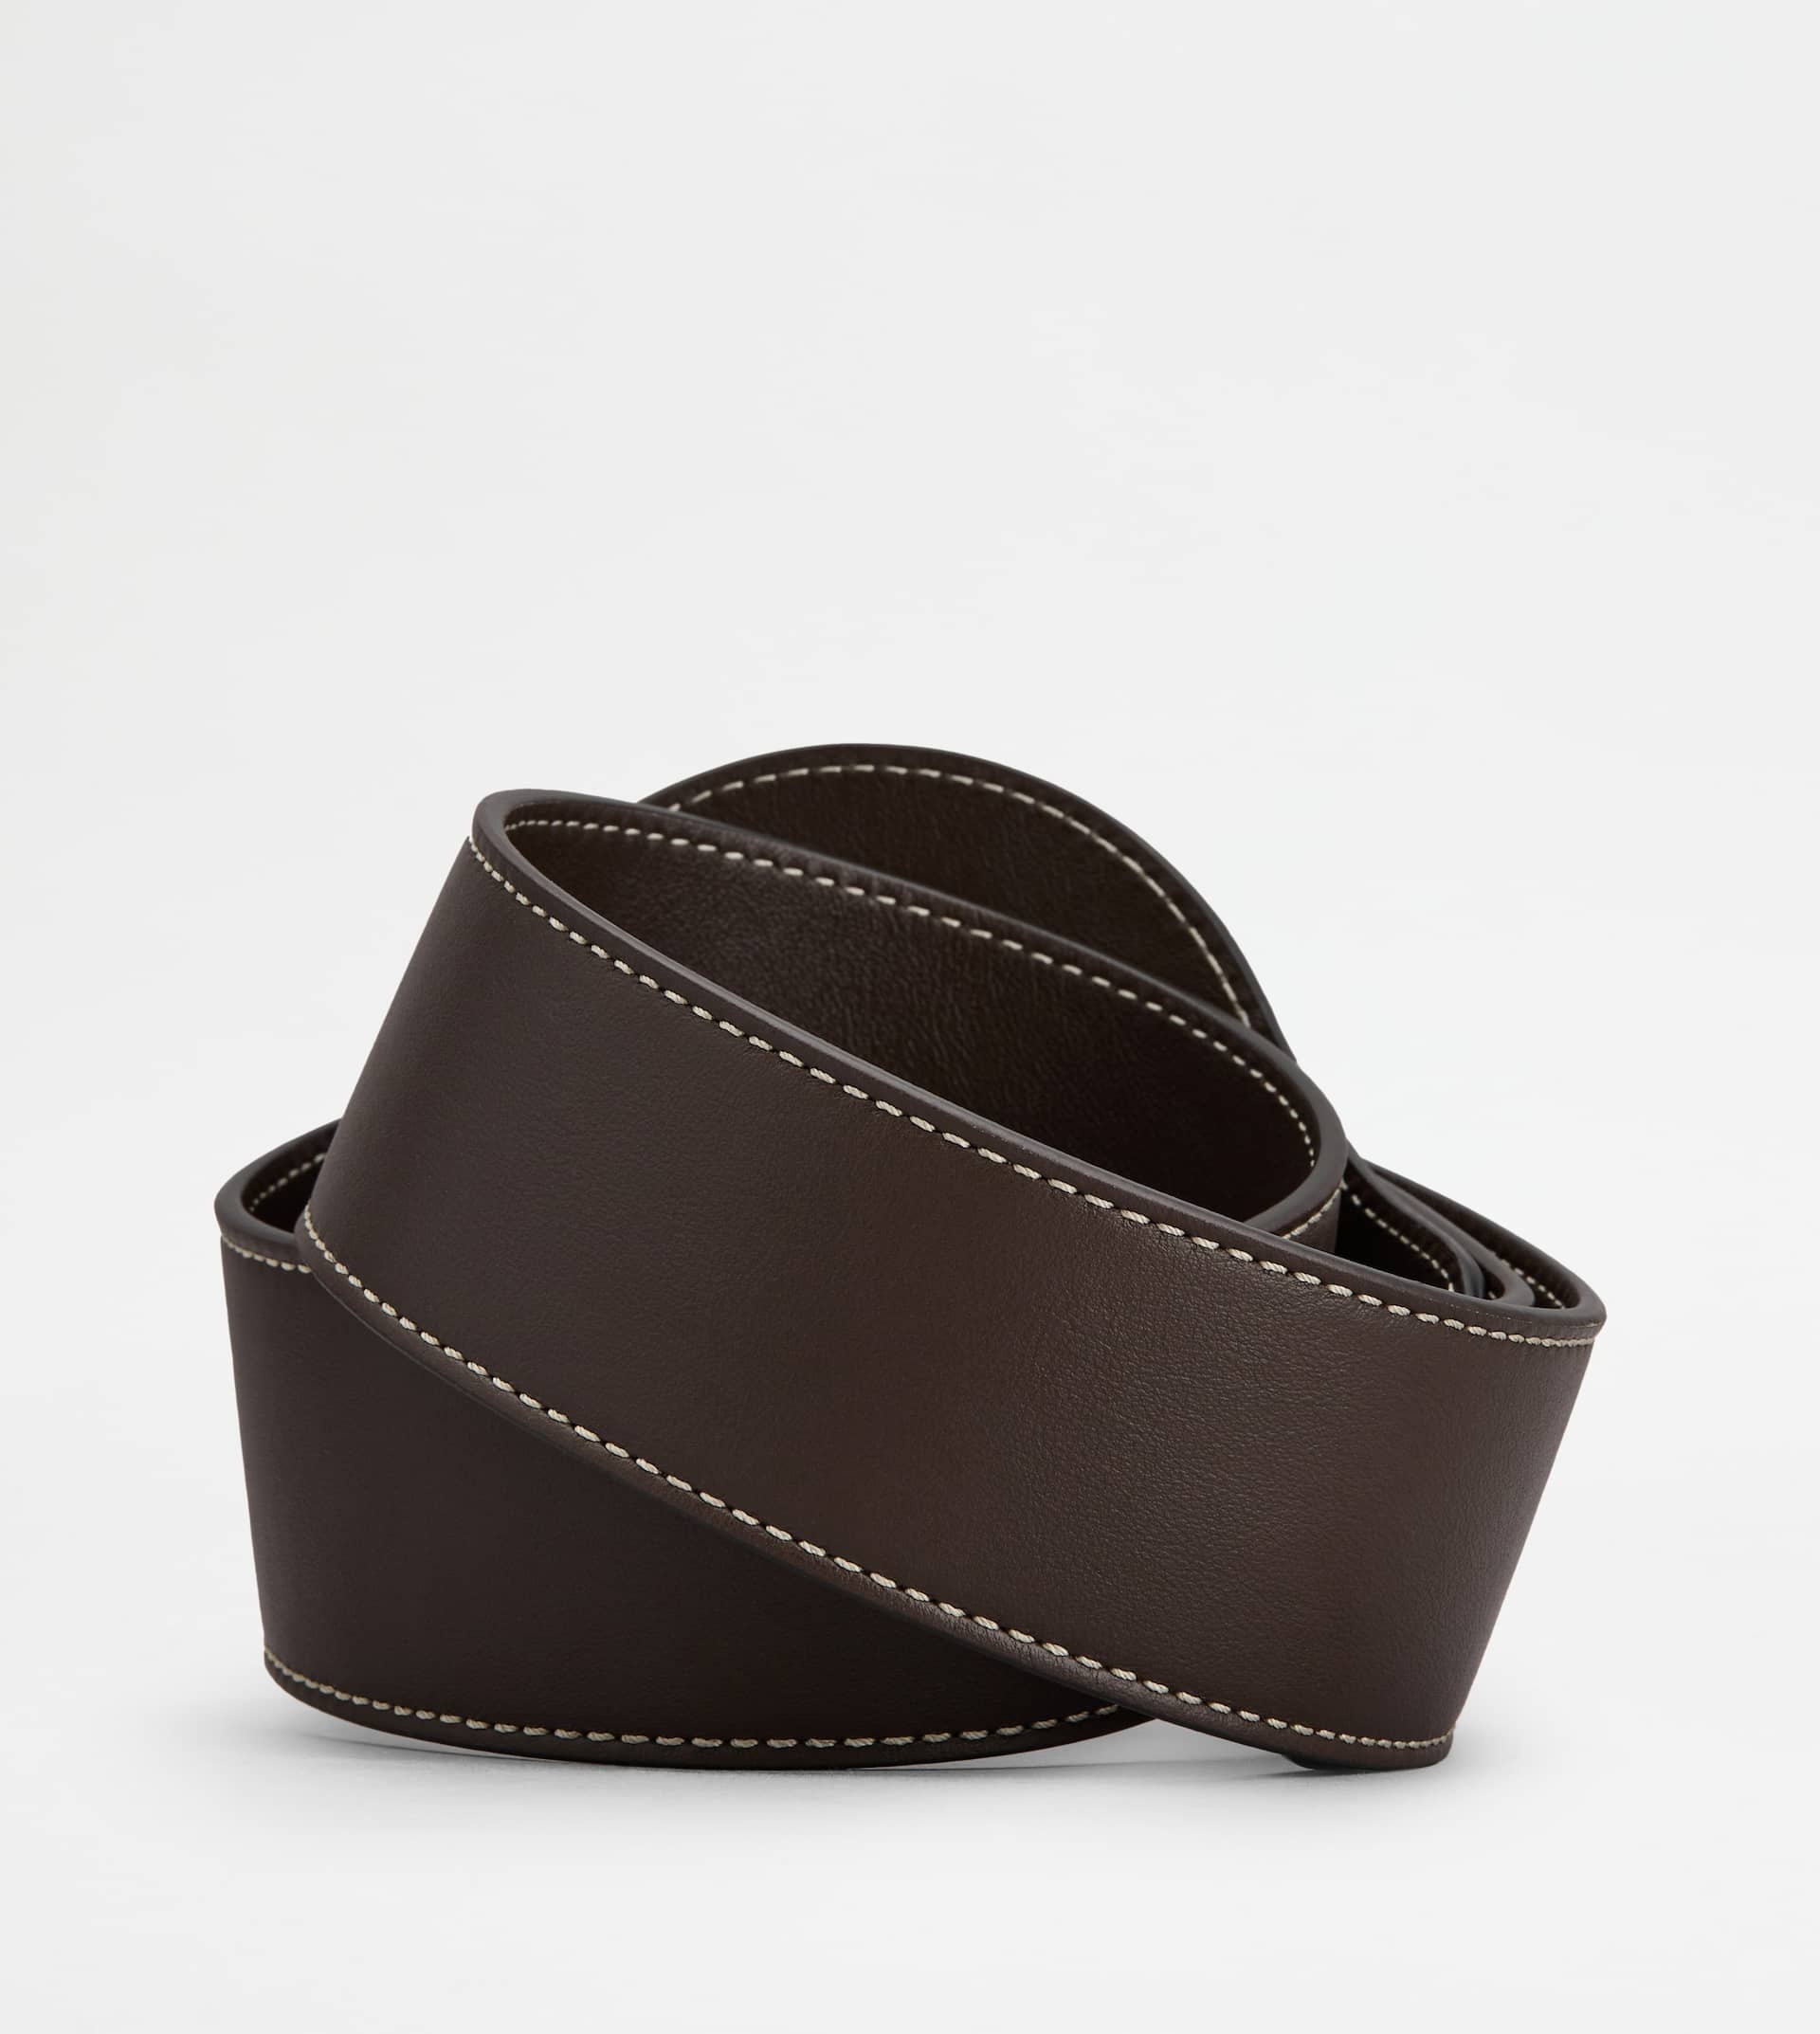 TOD'S BELT IN LEATHER - BROWN - 2